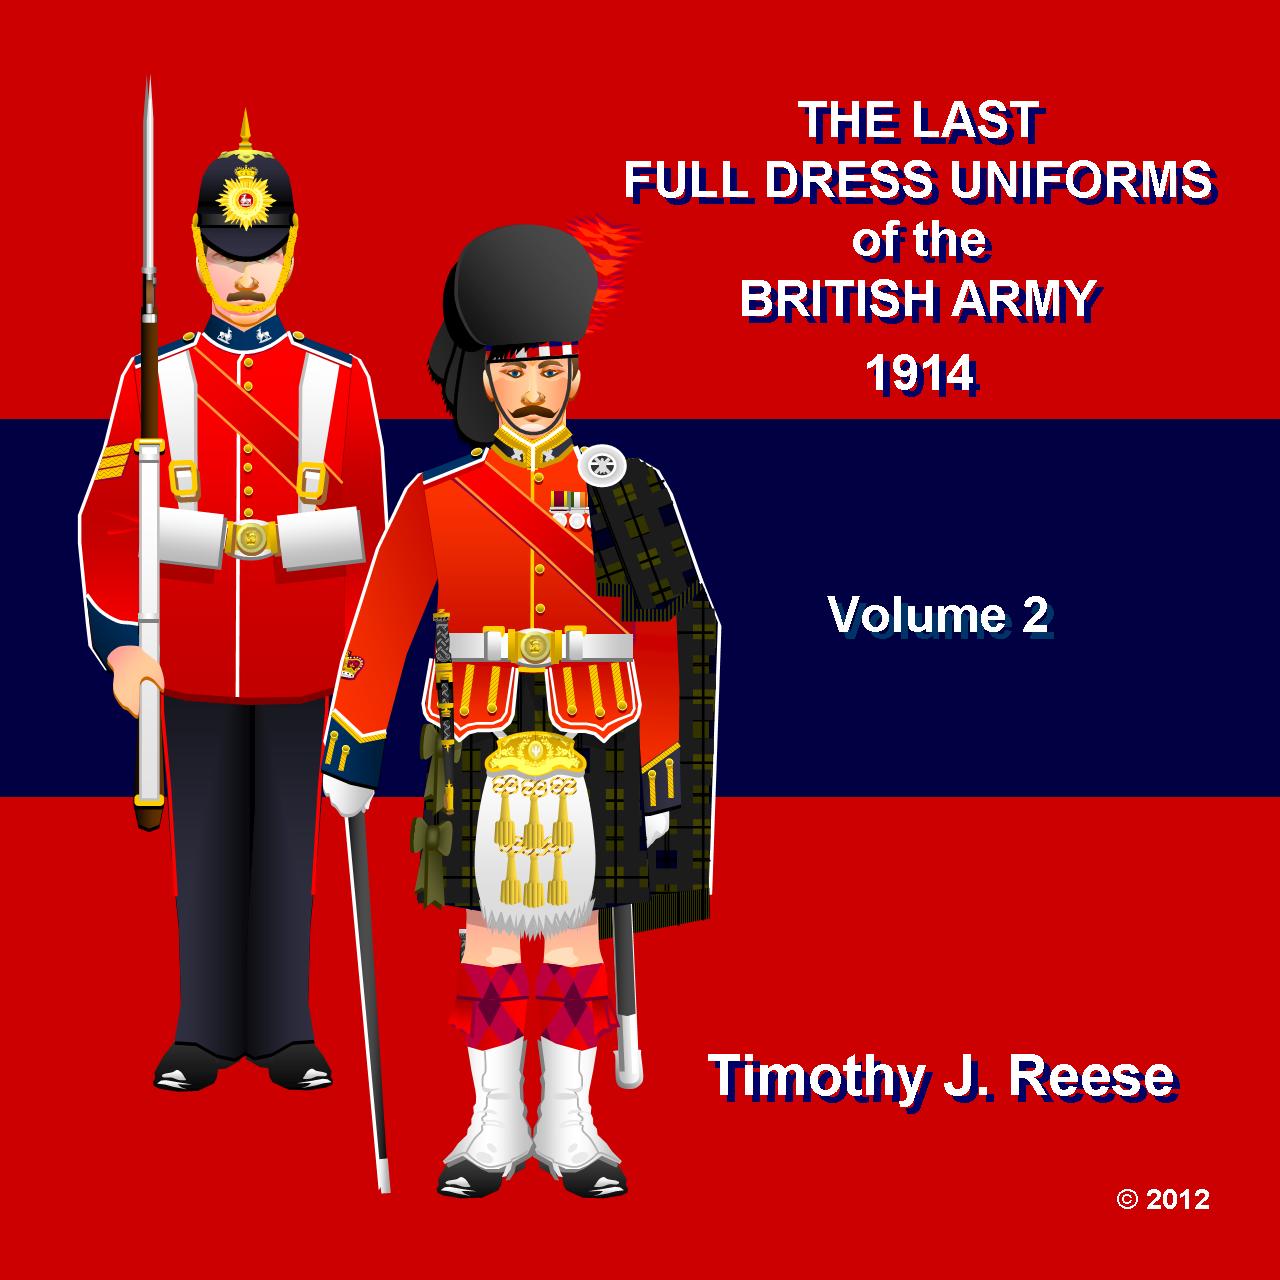 SAMPLE PLATE: The Last Full Dress Uniforms of the British Army, 1914, Volume 2